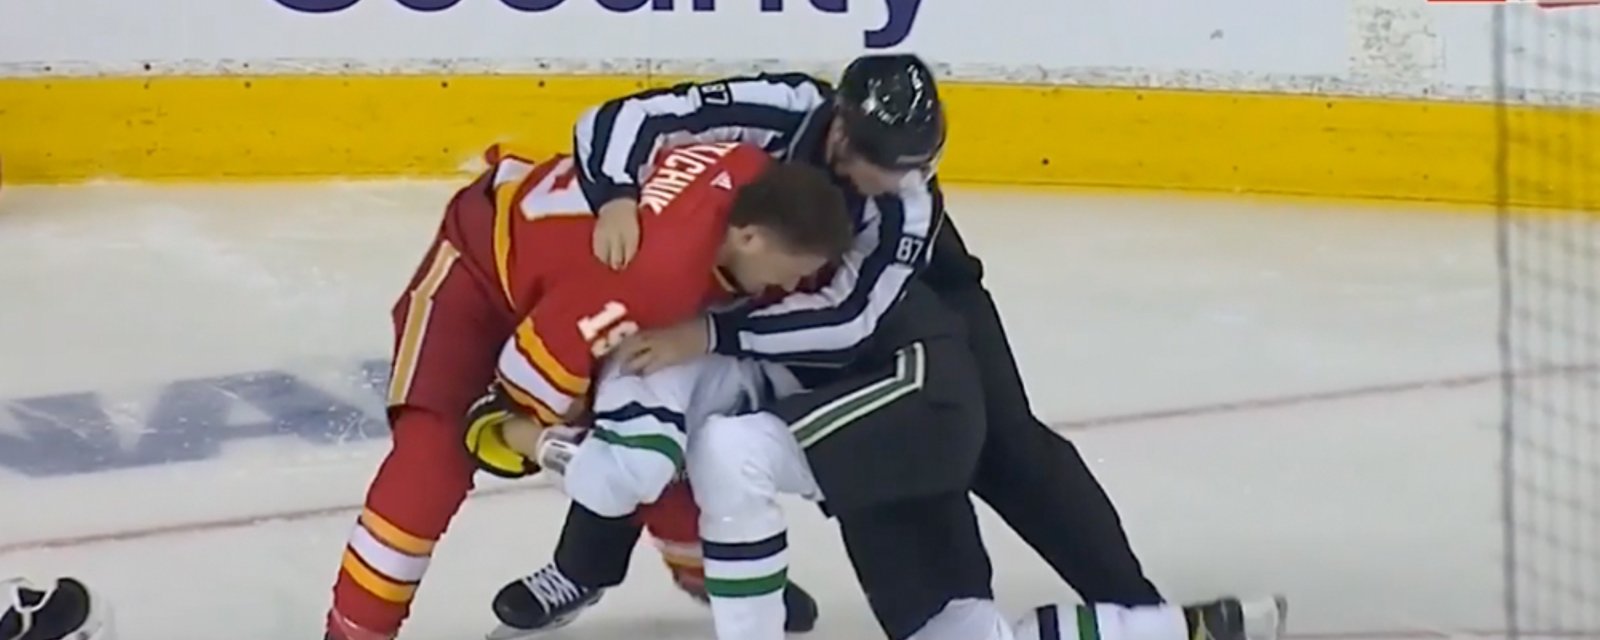 Gaudreau scores after the whistle then Klingberg drops the gloves with Tkachuk